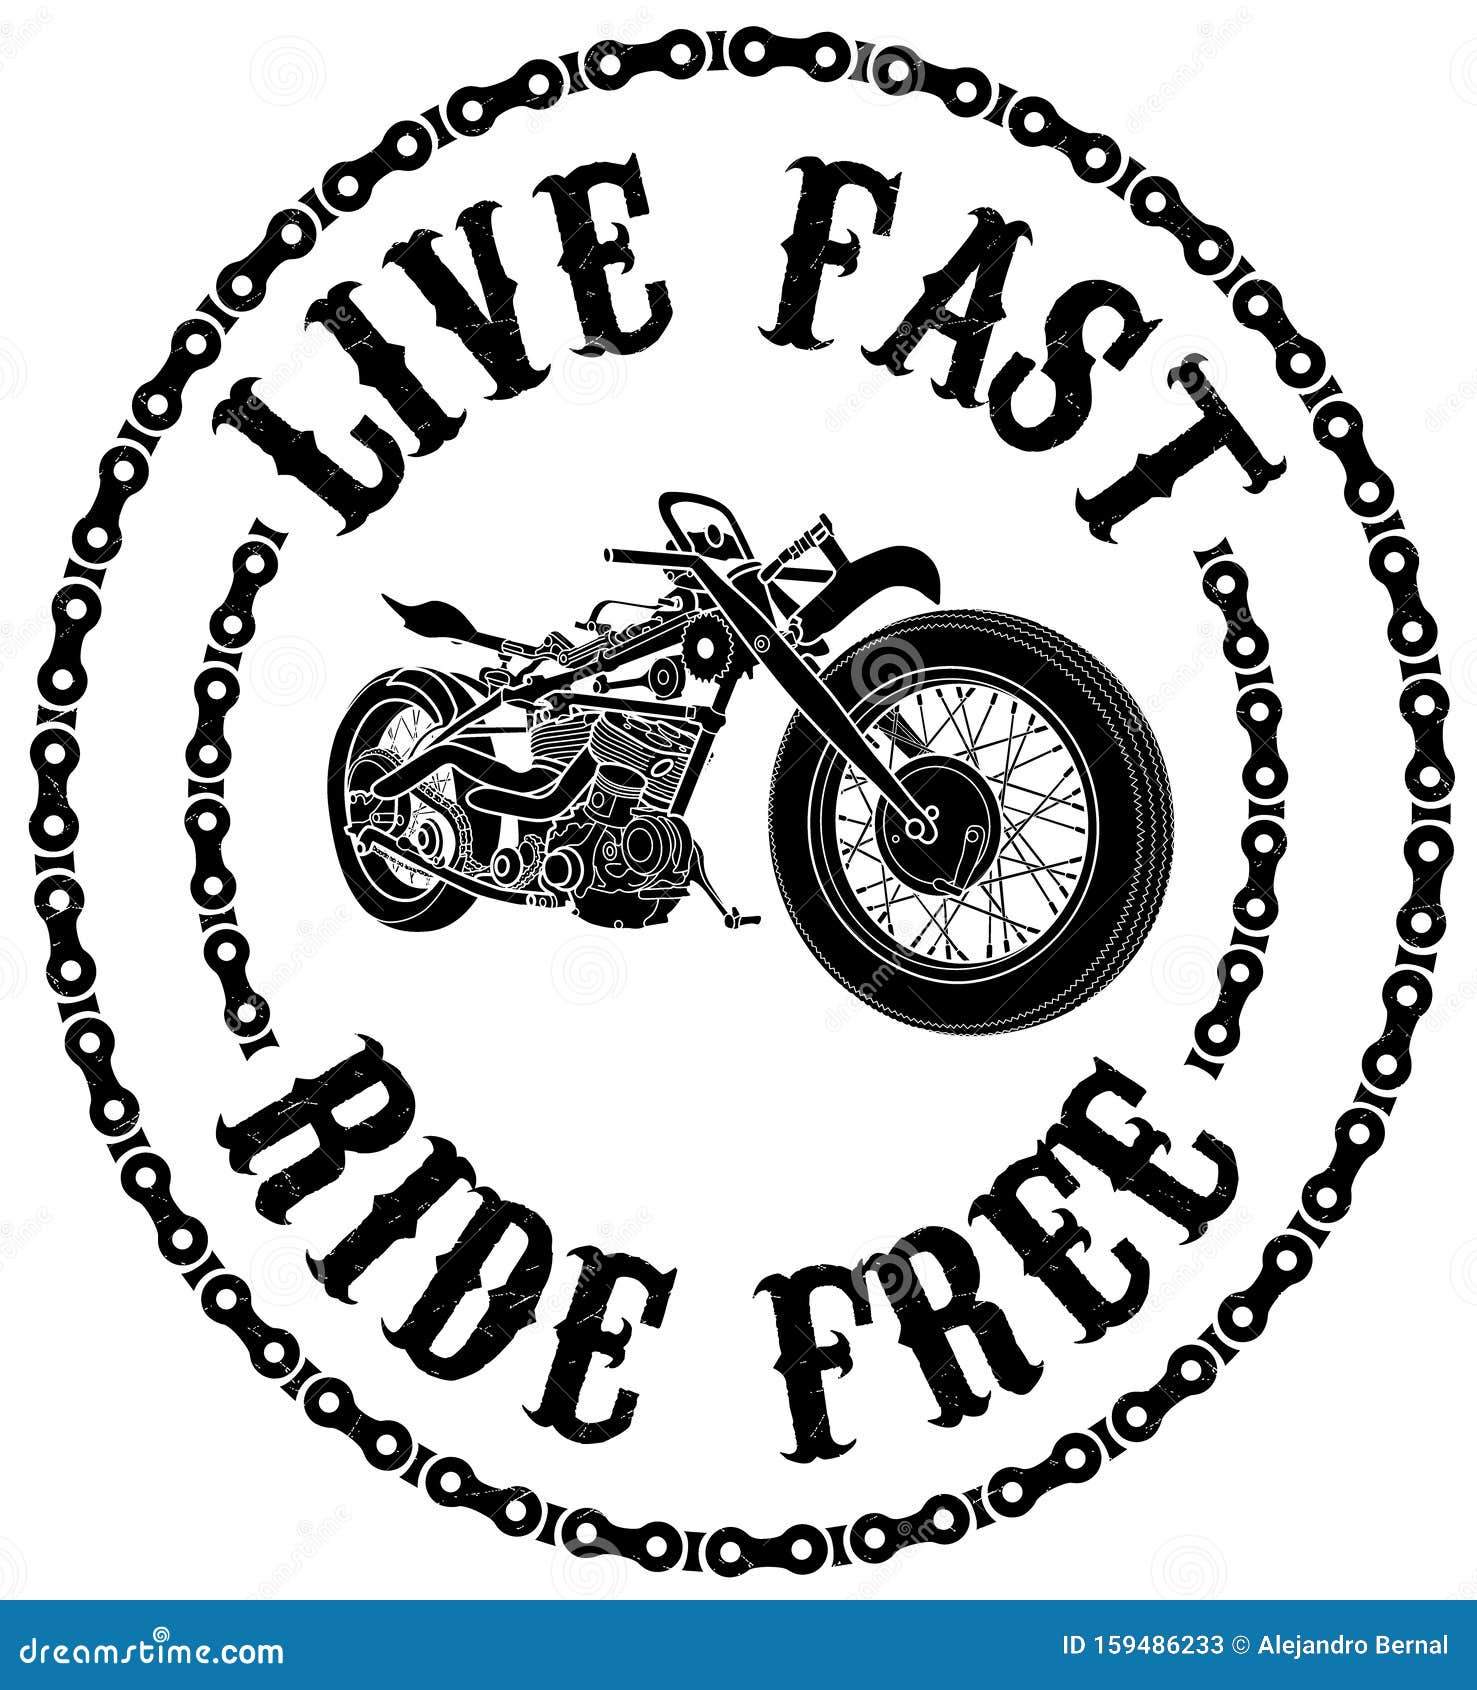 Ride Fast Live Free